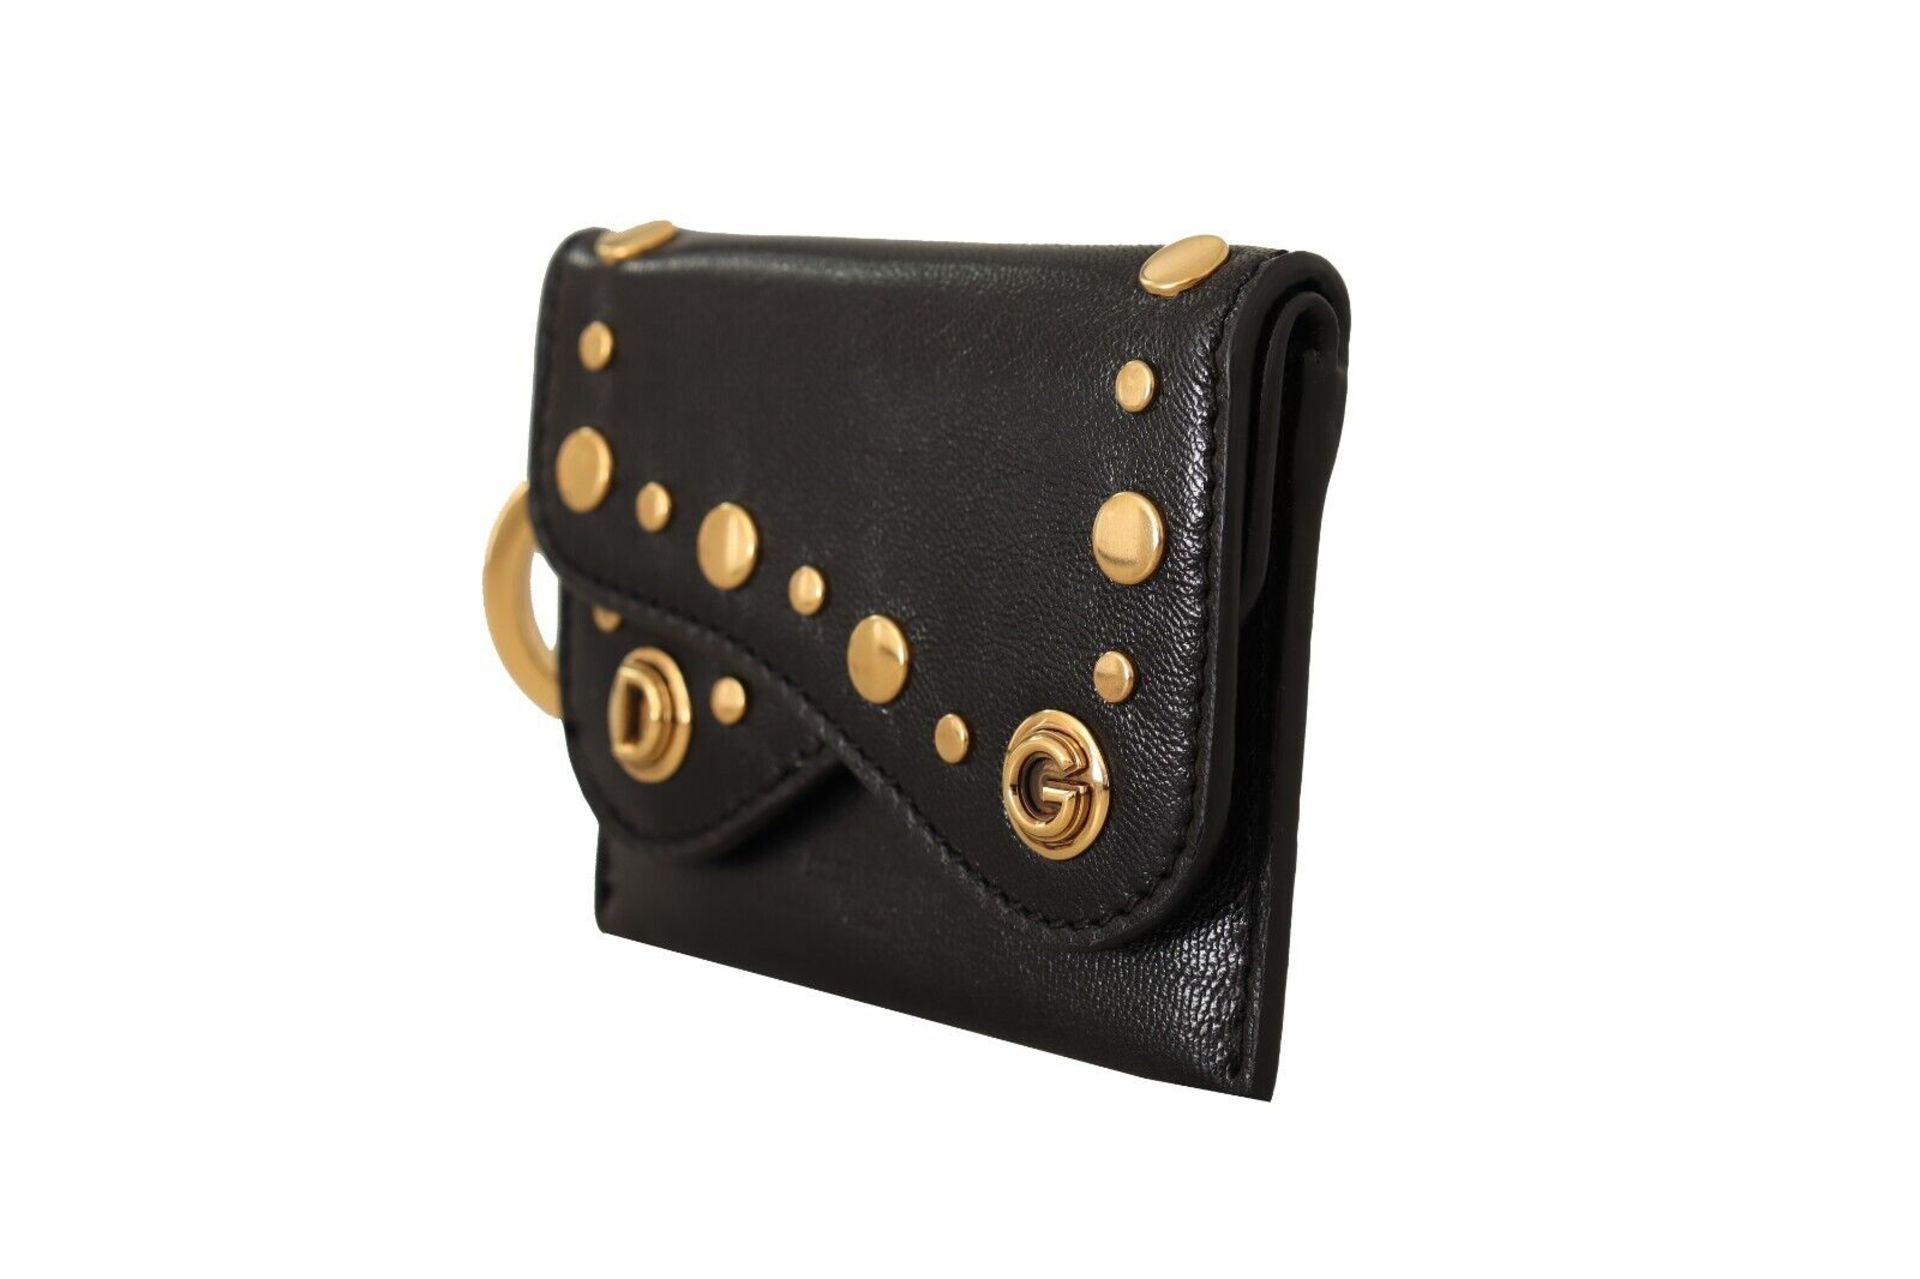 BLACK LEATHER MINI BIFOLD STUDDED KEYCHAIN WALLET - Image 5 of 9